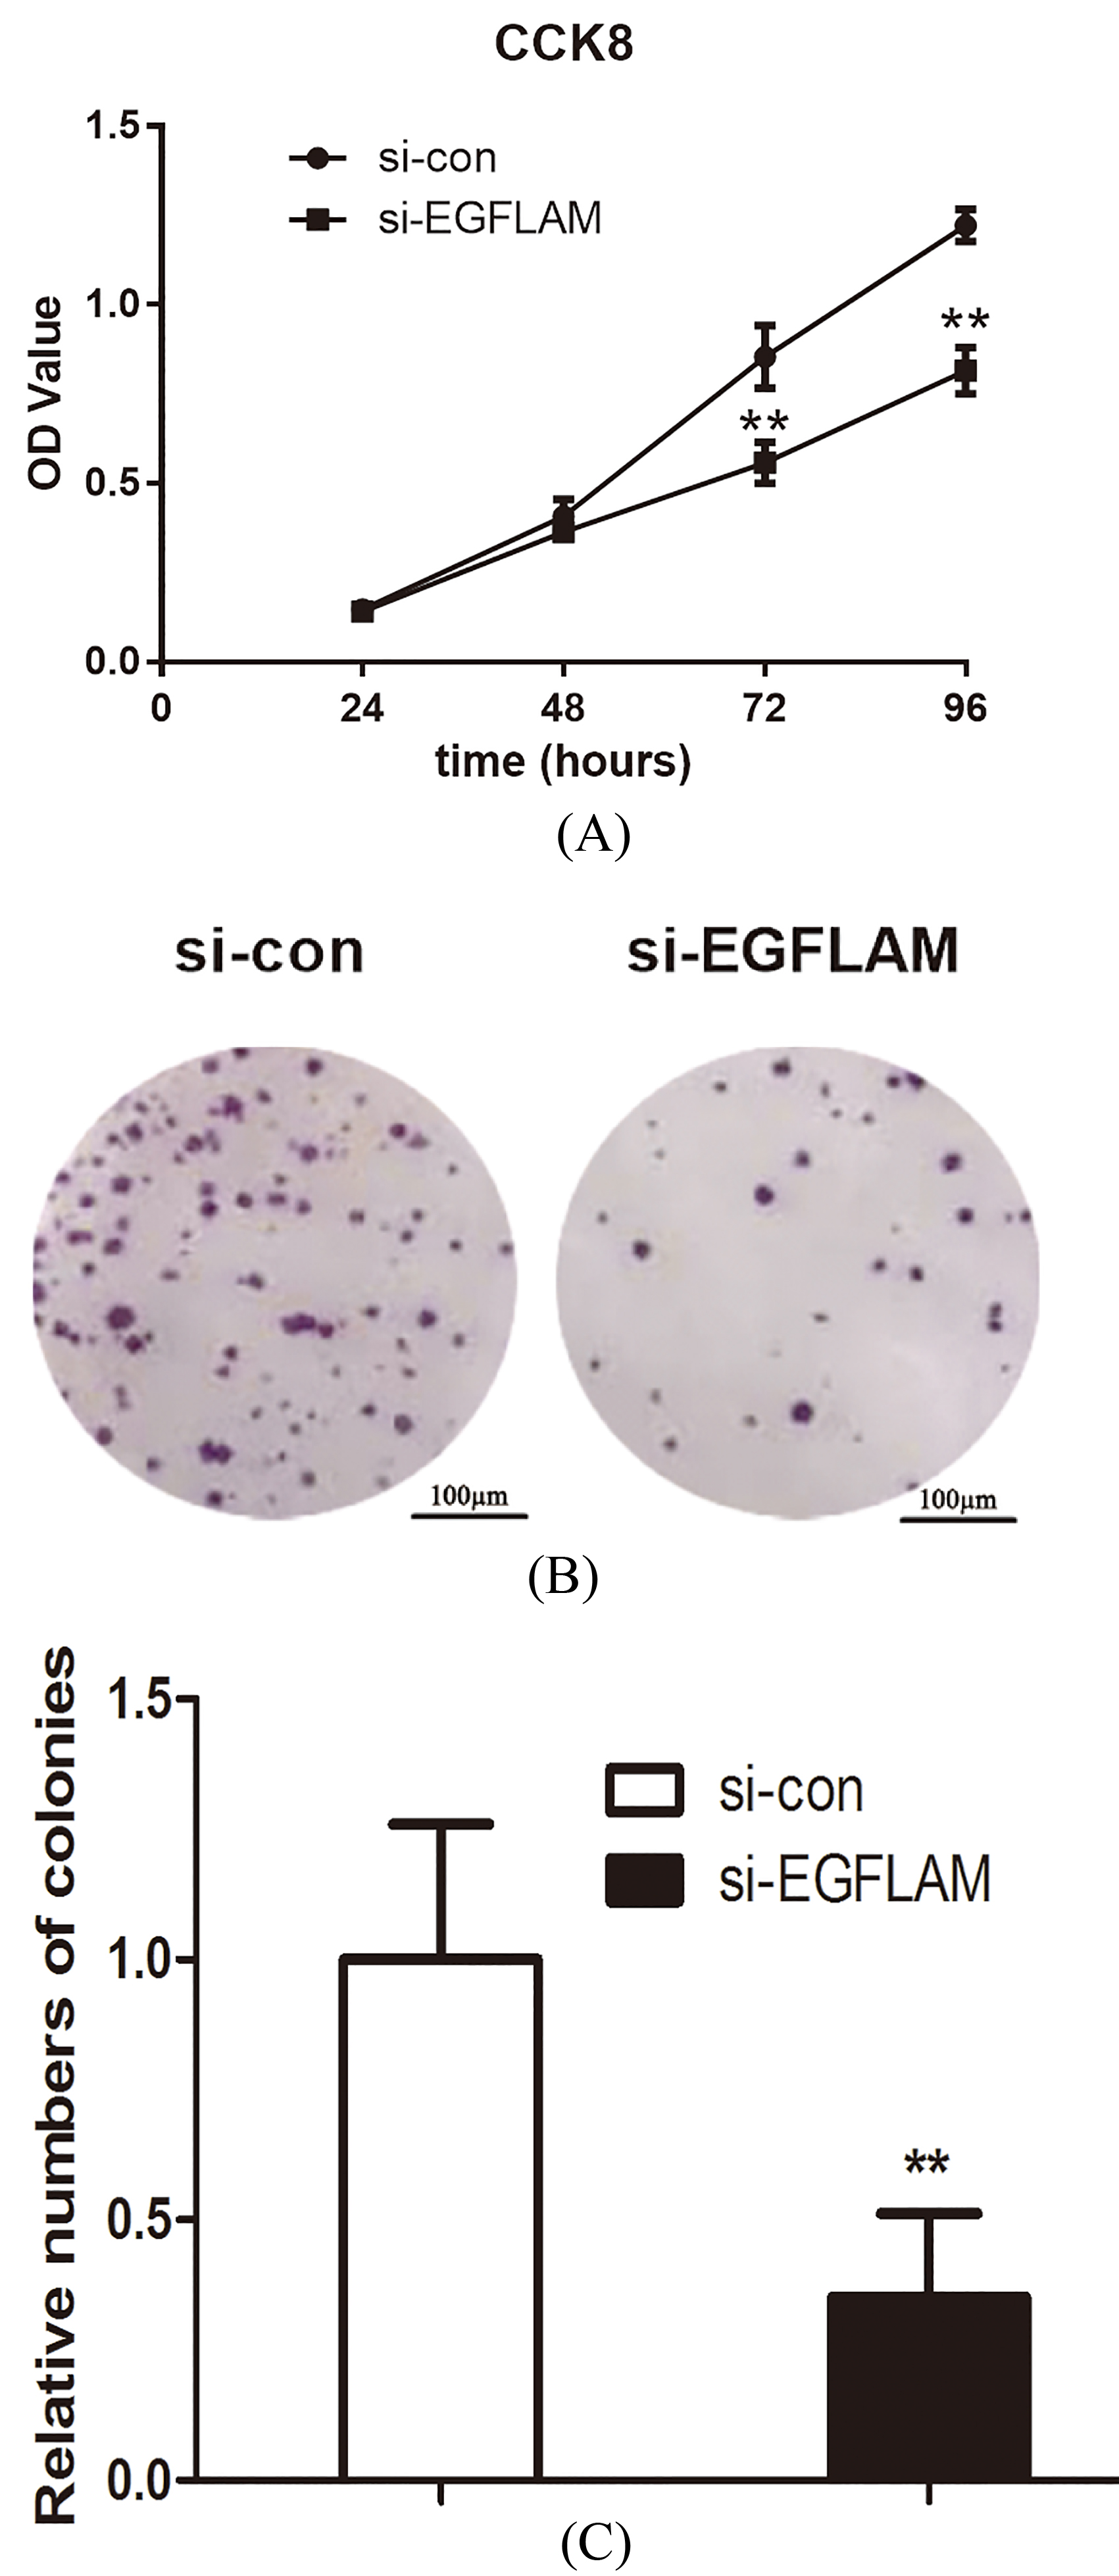 EGFLAM promoted the proliferation of U87 cells. (A) Knockdown of EGFLAM inhibited the viability of U87 cells, which was determined by CCK-8 assays. (B) Knockdown of EGFLAM decreased the colony numbers of U87 cells, which was measured by colony formation assays (Original magnification × 2). si-EGFLAM group represents EGFLAM in U87 cells were silenced, and si-con group represents EGFLAM in U87 cells were not silenced. **p< 0.01 versus si-con group.